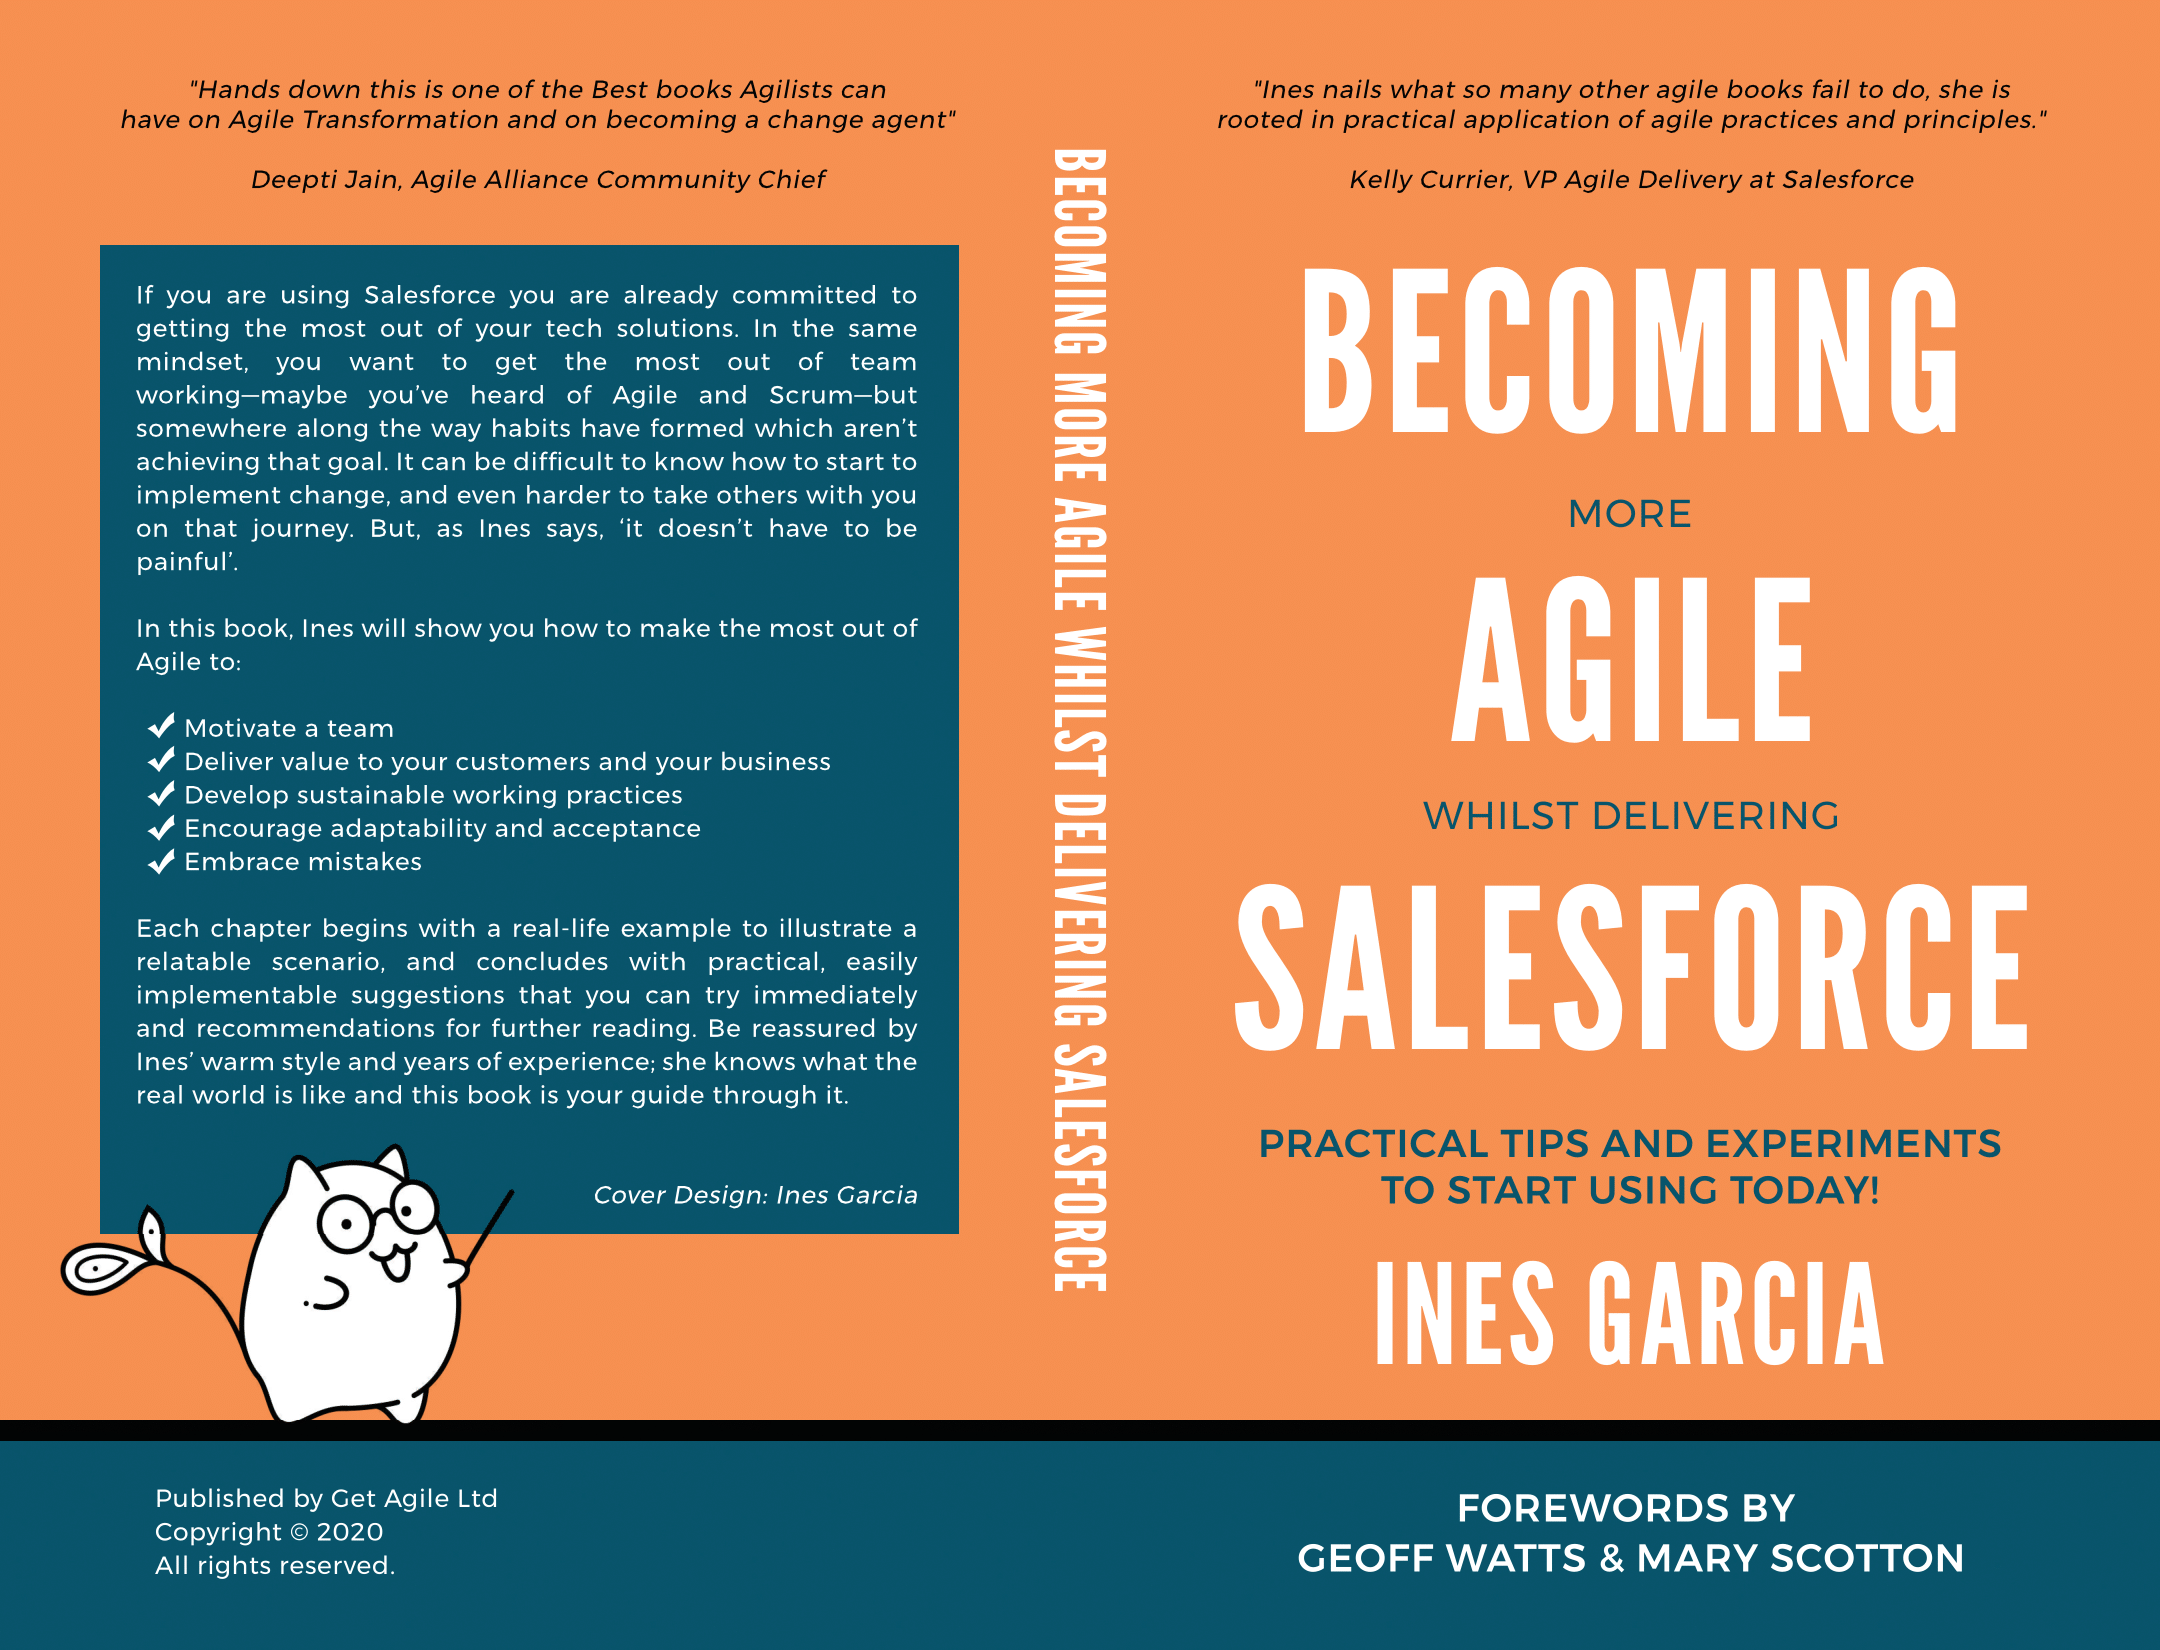 Becoming more Agile whilst delivering Salesforce